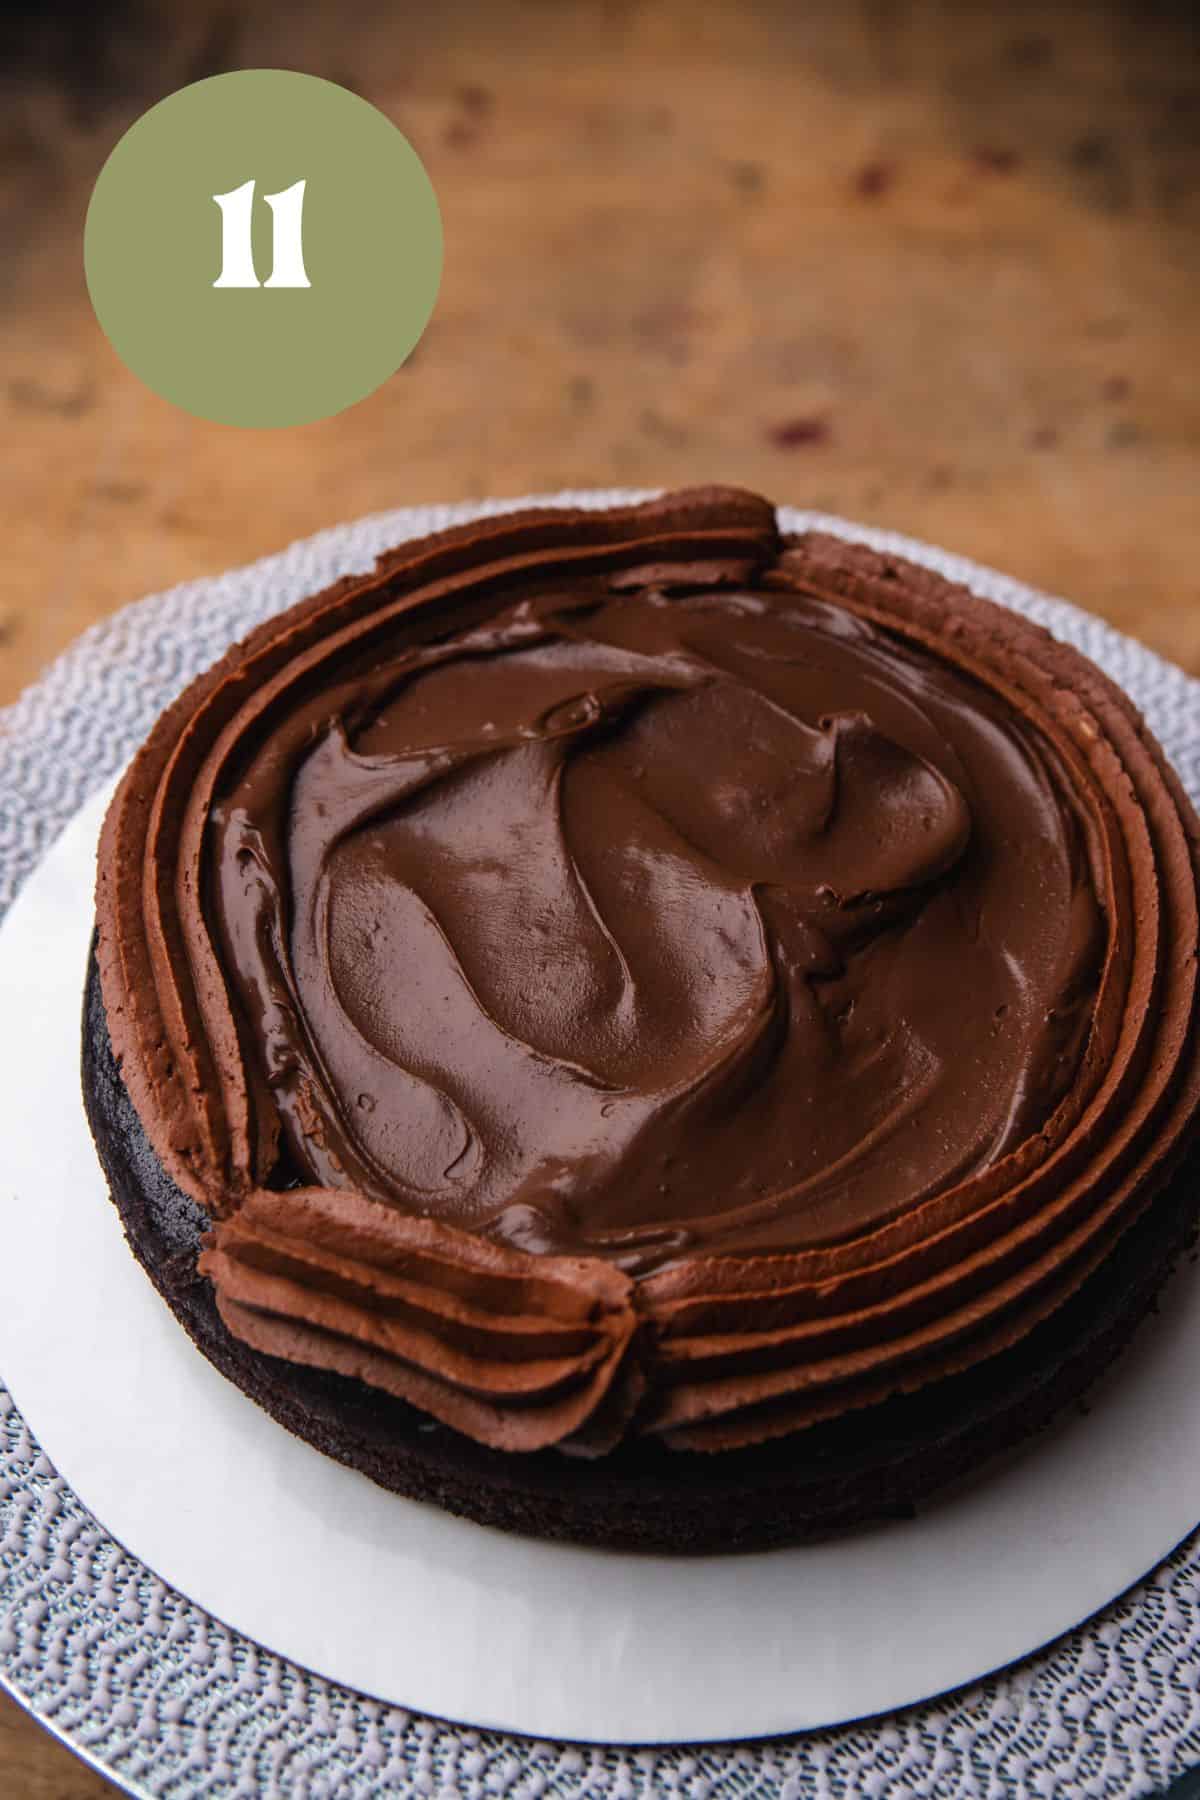 A cake layer with frosting a chocolate ganache on a cake board.